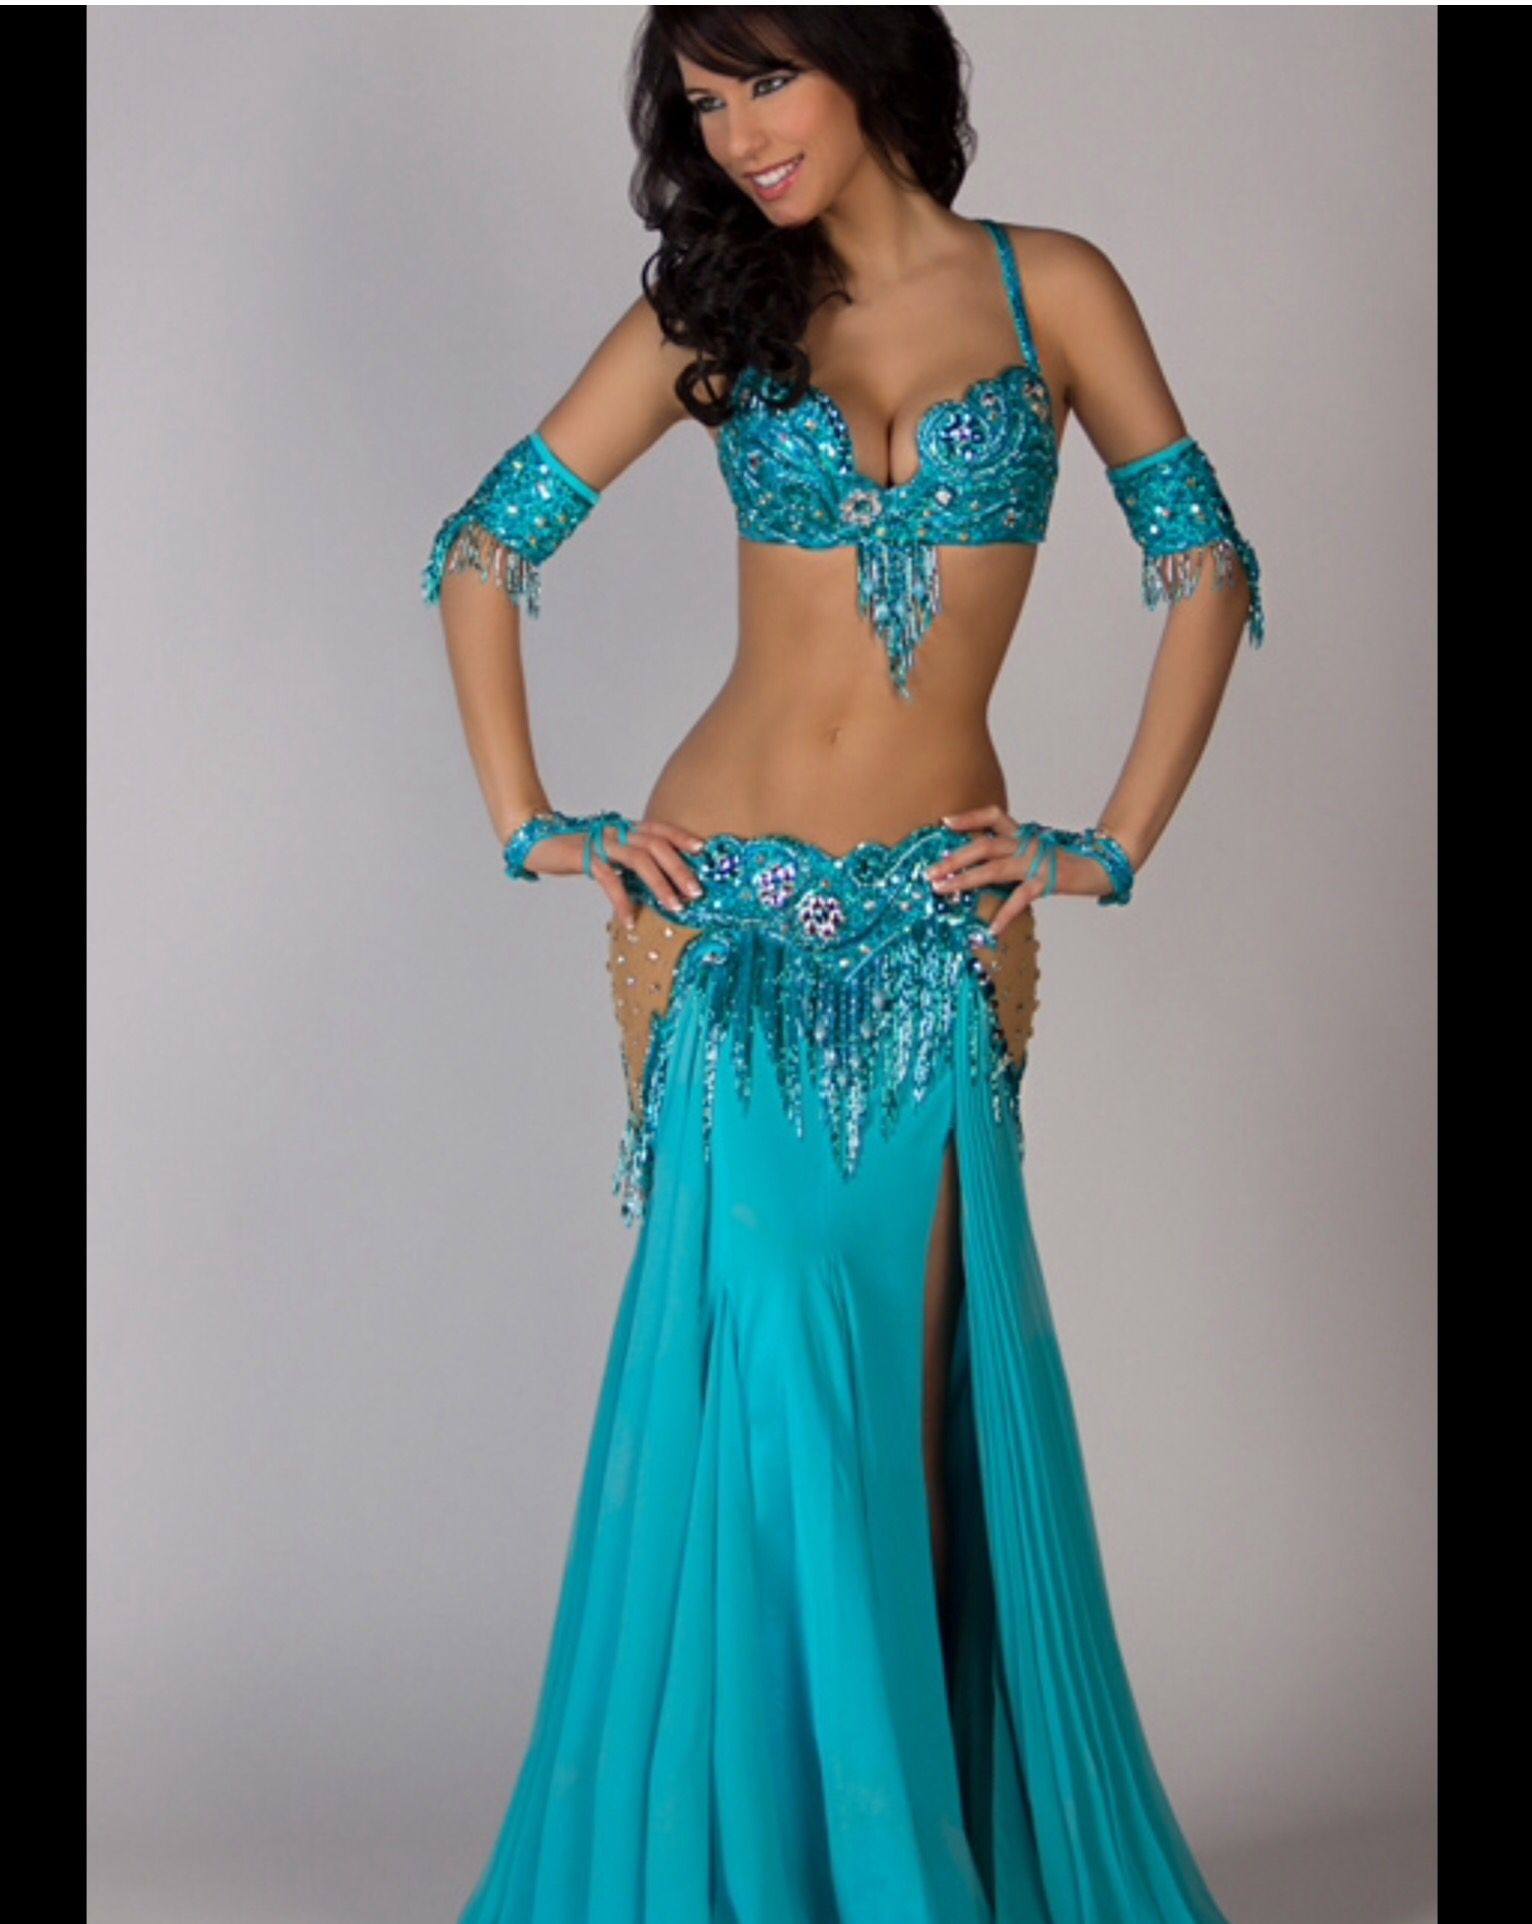 armando rojo recommends Sexy Belly Dancer Outfit